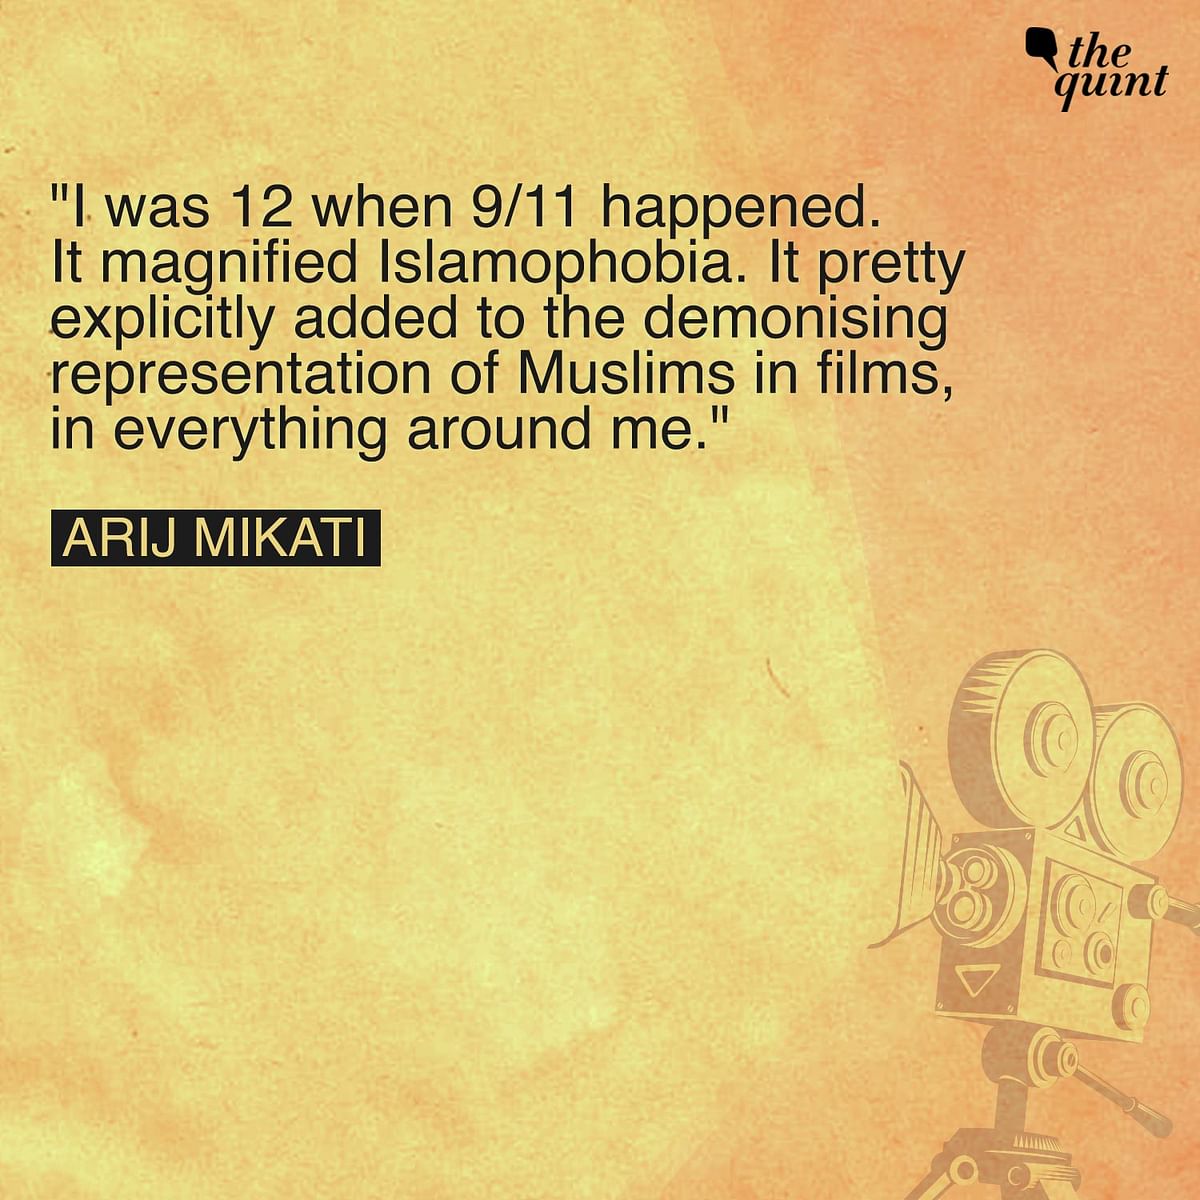 Pillars Fund in partnership with actor and activist Riz Ahmed is aiming to empower Muslim artists in cinema.